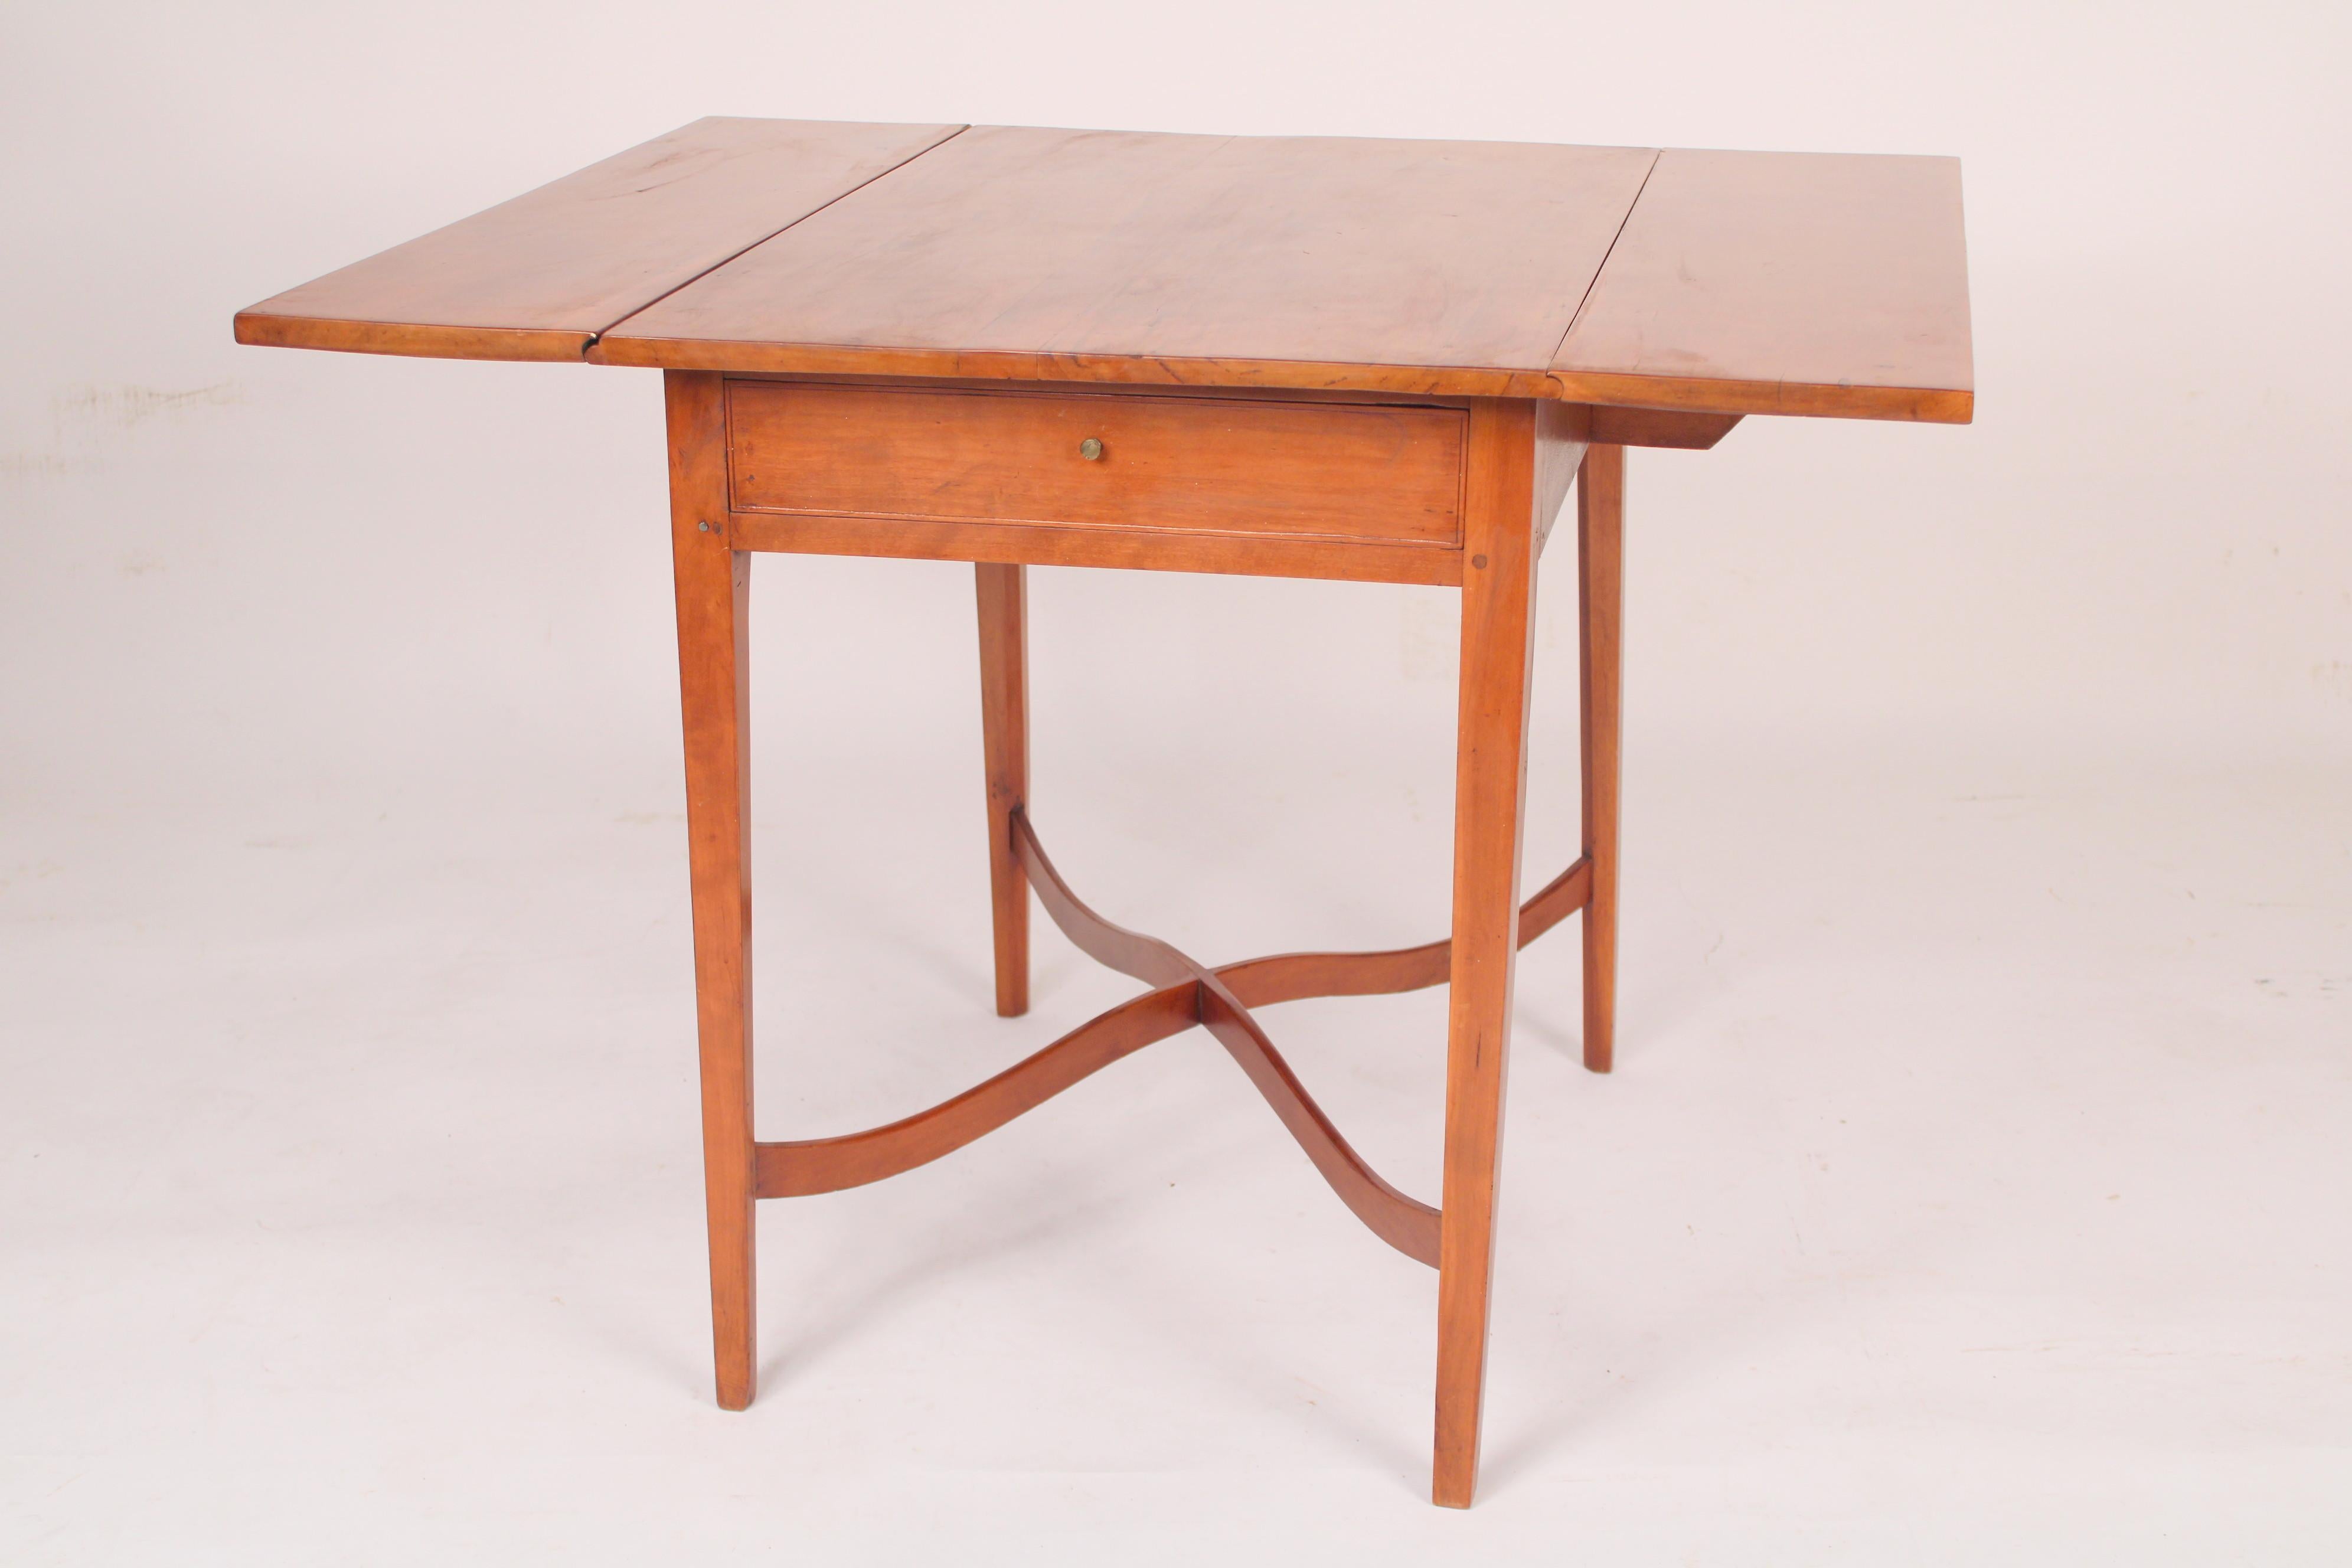 North American Antique American Federal Style Drop Leaf Table For Sale